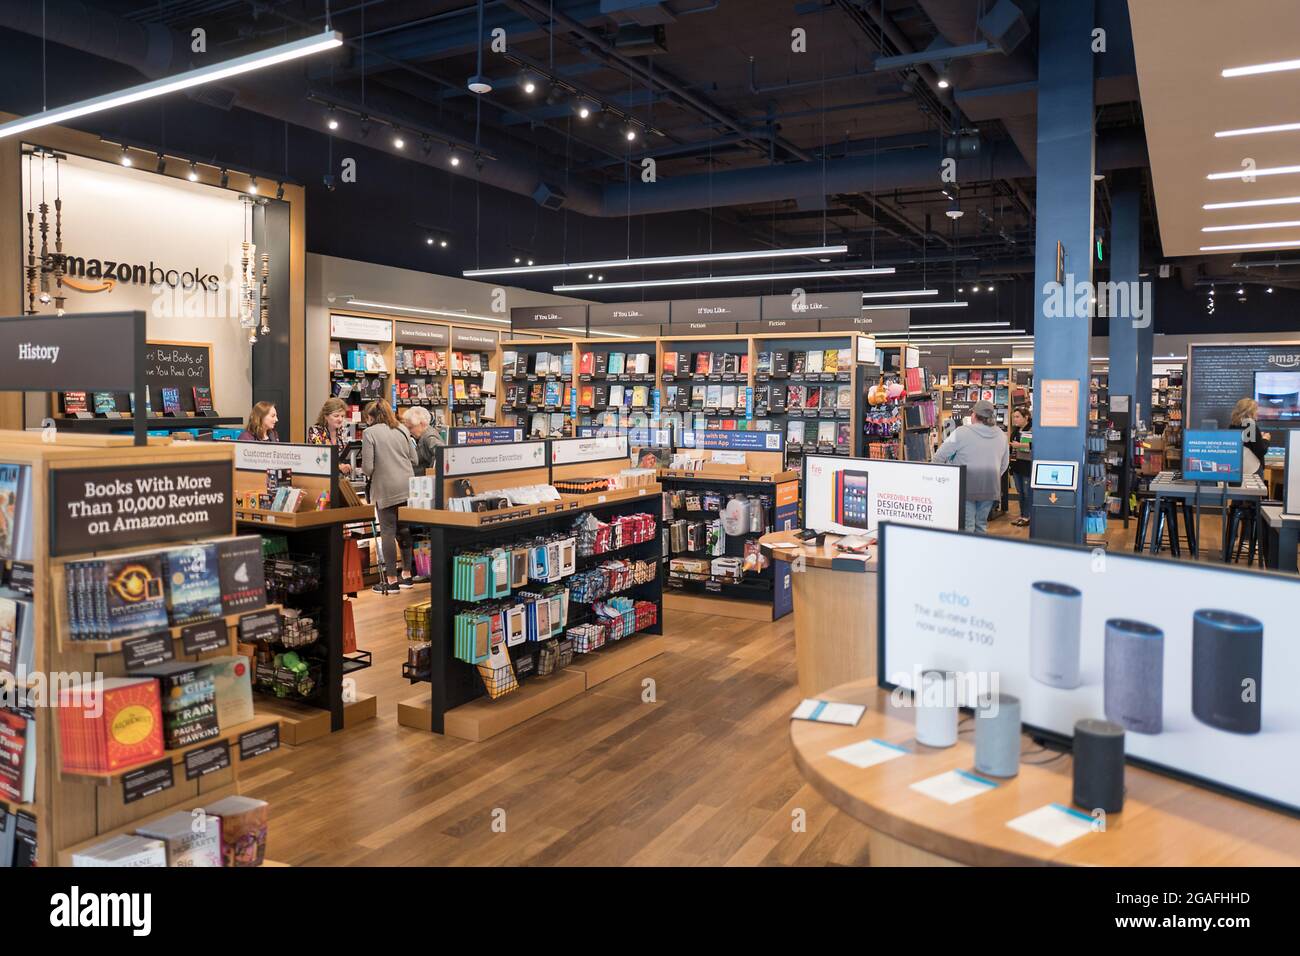 Interior of an Amazon Books physical retail store at the Broadway Plaza  shopping center in Walnut Creek, California, November 17, 2017. Amazon has  increasingly expanded into physical retail, as well as grocery